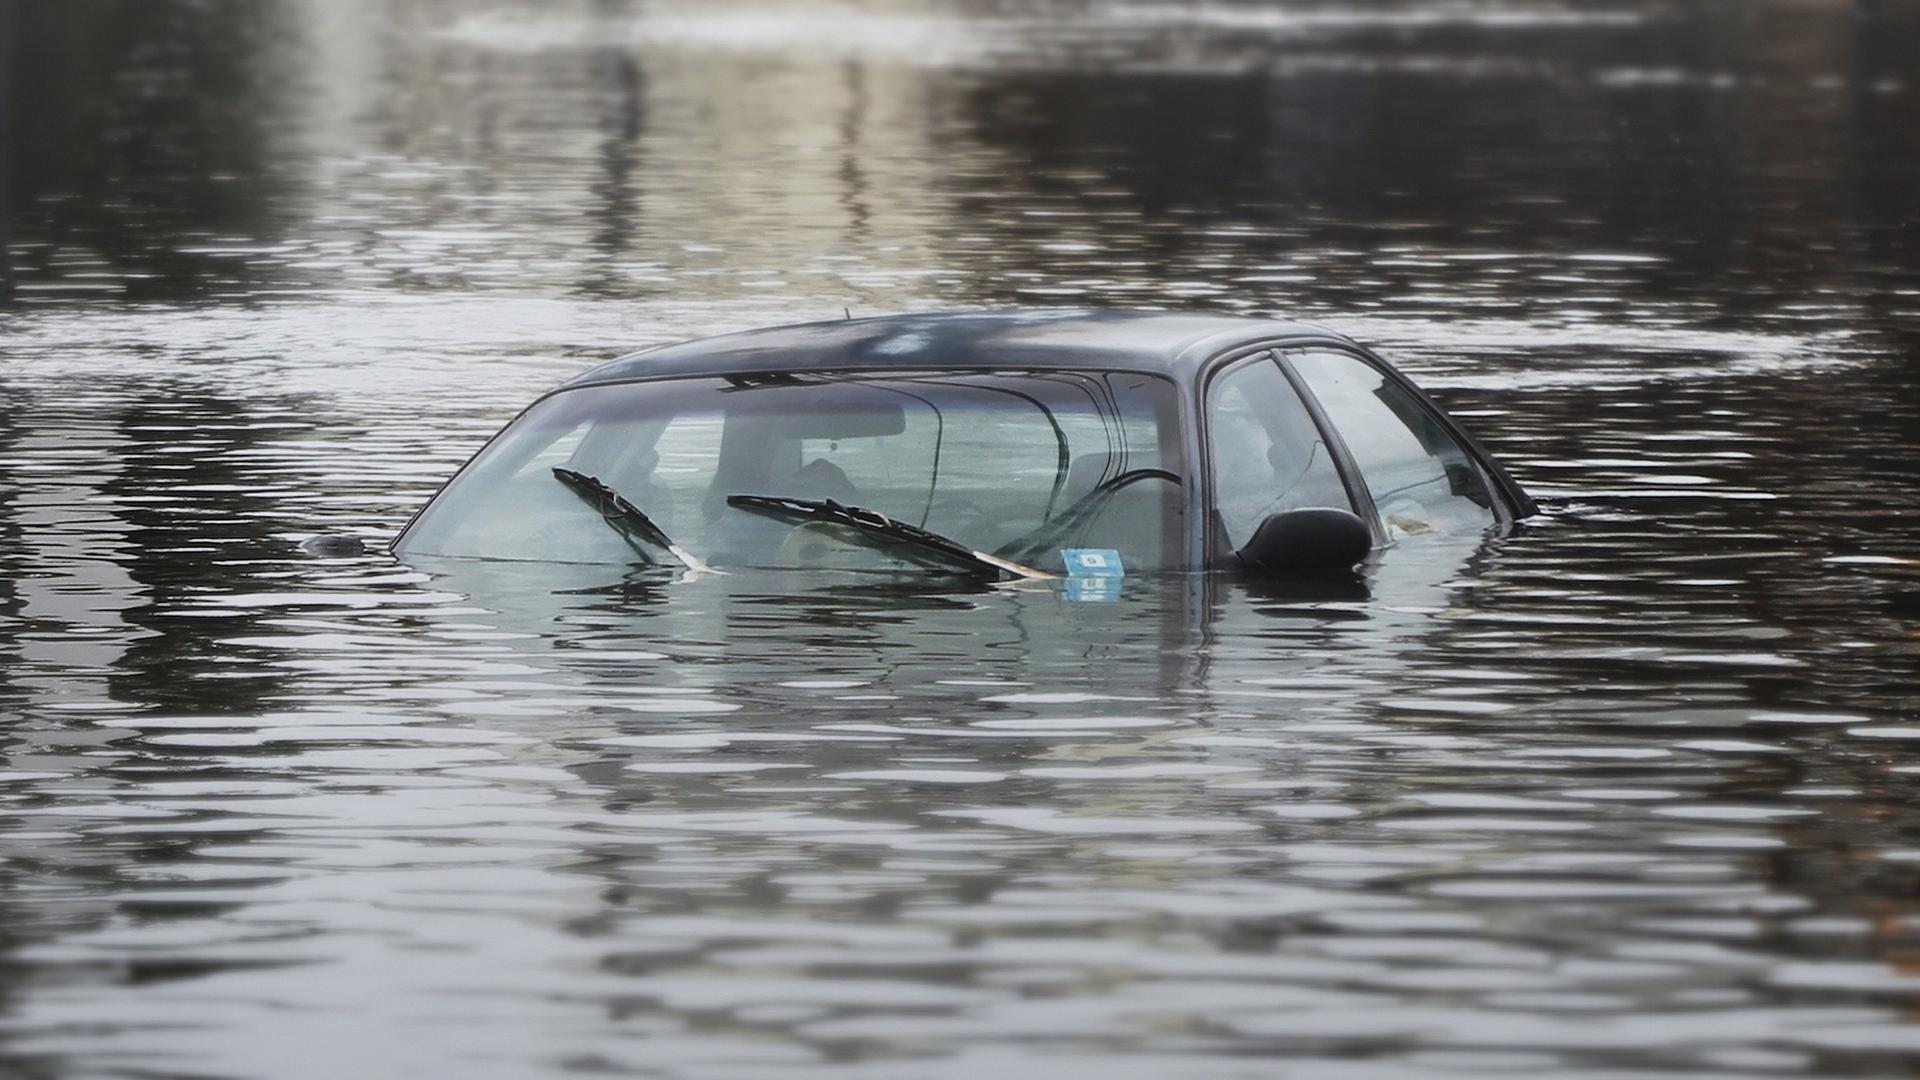 Insurance Benefit for Damaged Cars in Floods